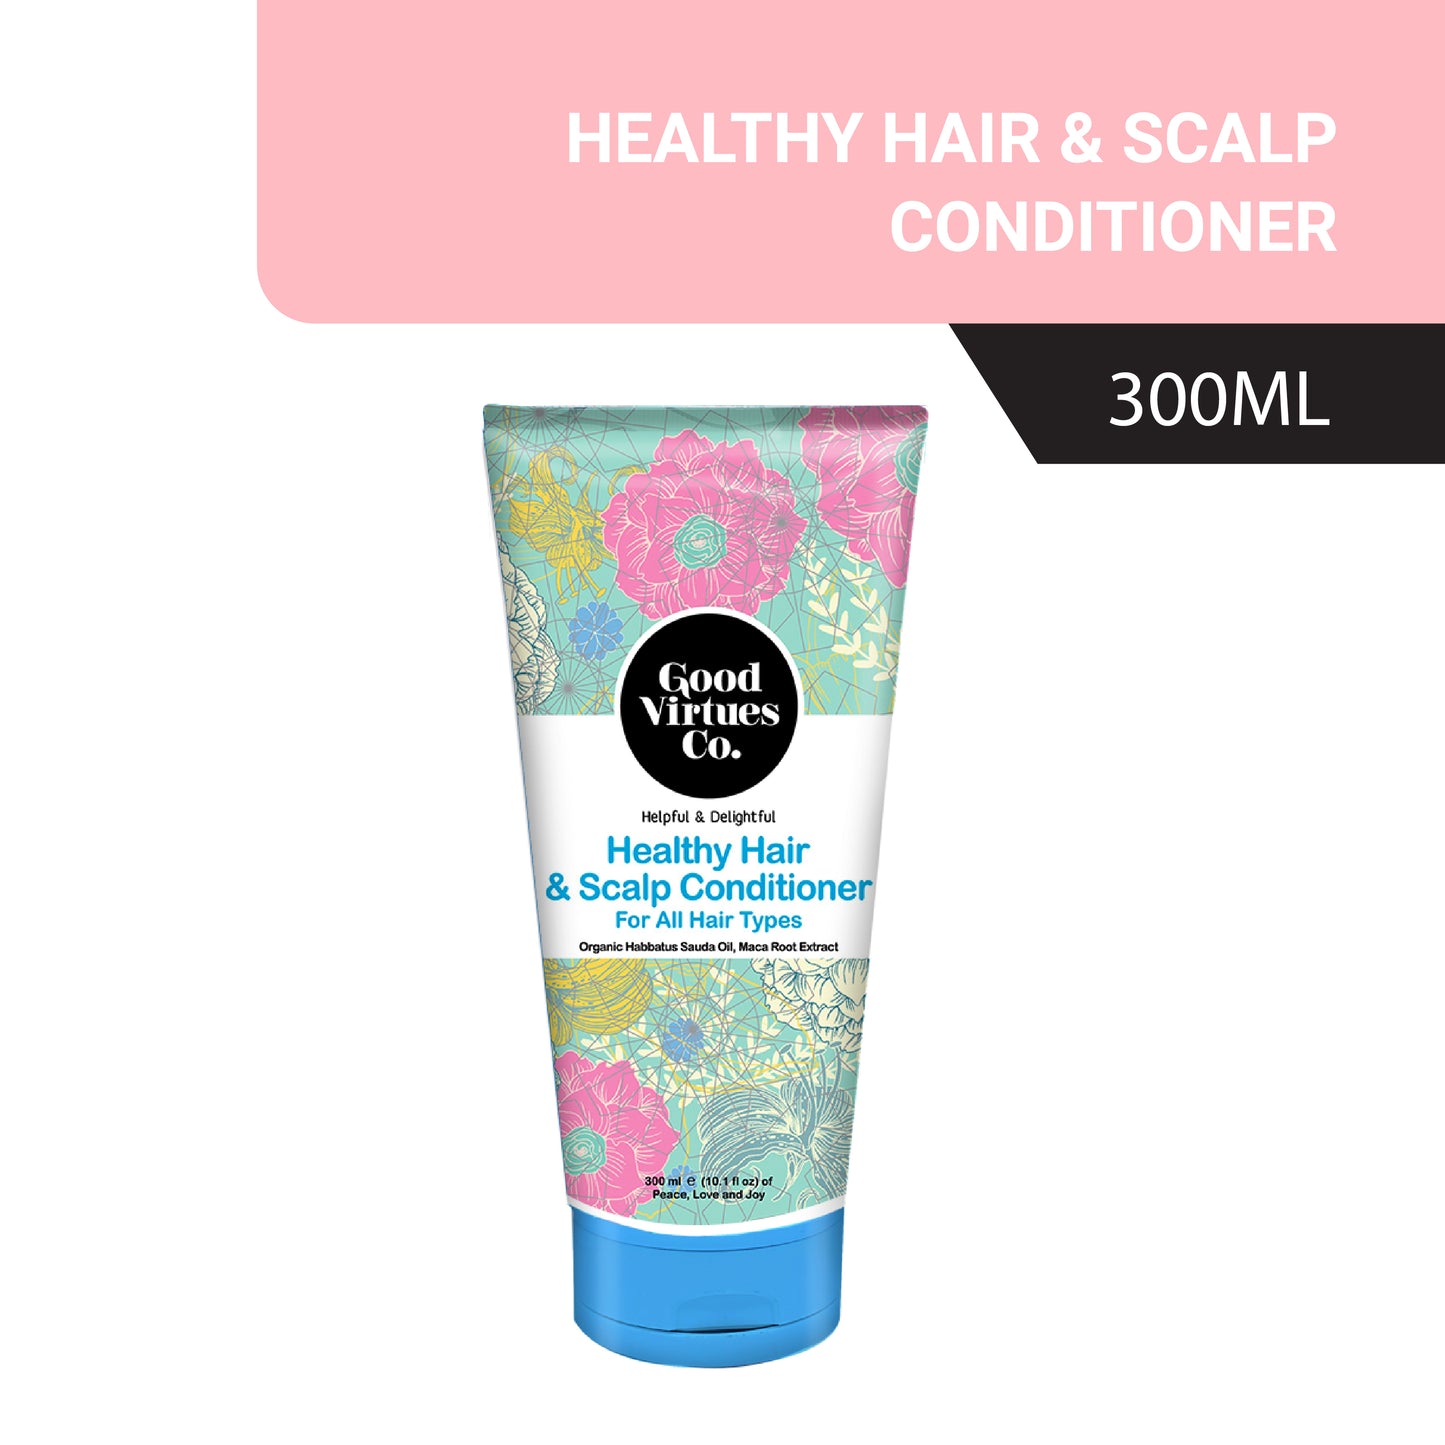 Helpful & Delightful Healthy Conditioner for All Hair Types with Organic Black Seed Oil